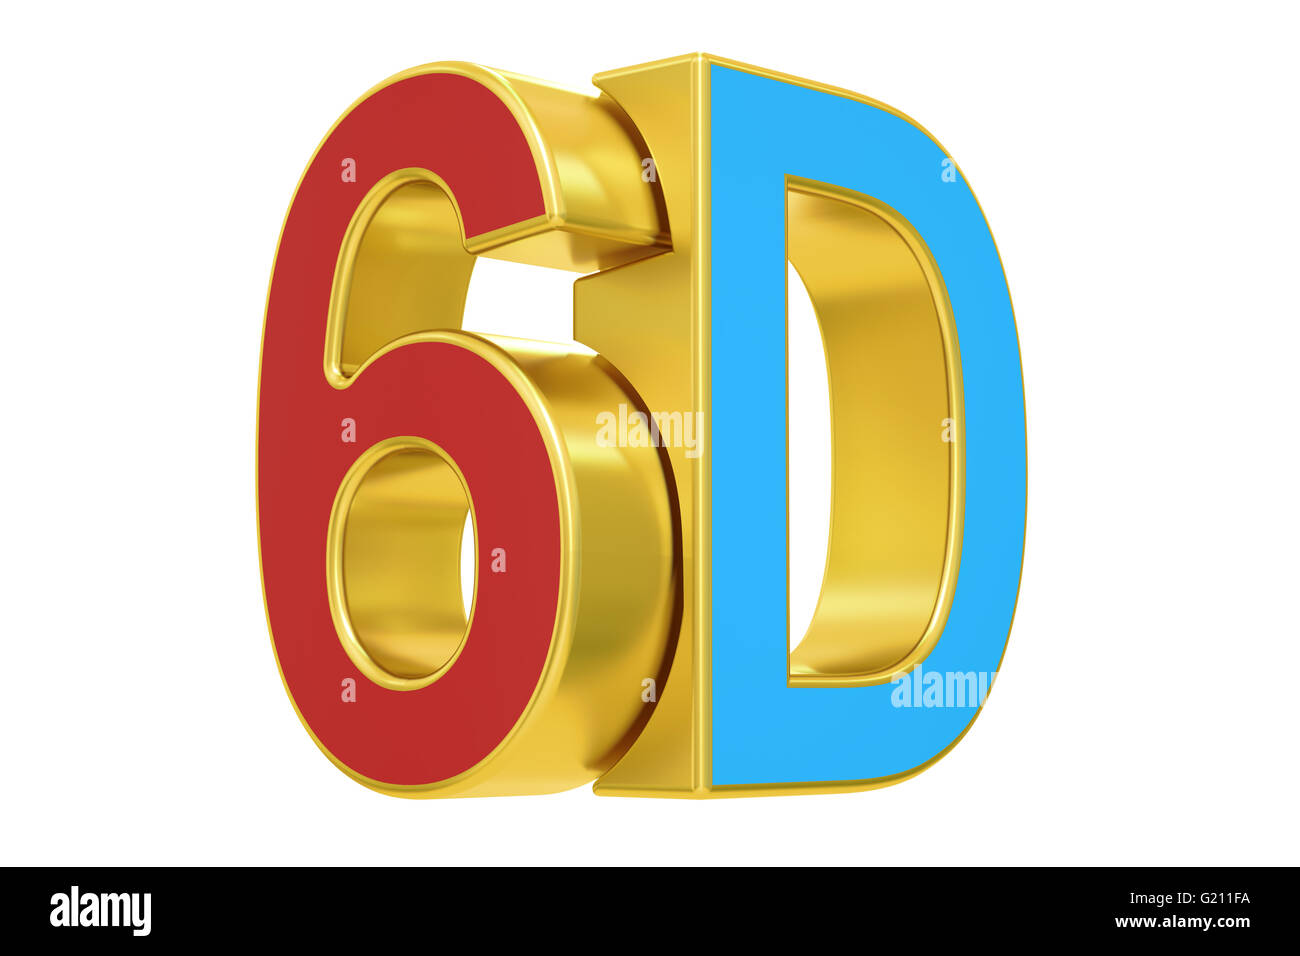 6D logo, 3D rendering  isolated on white background Stock Photo